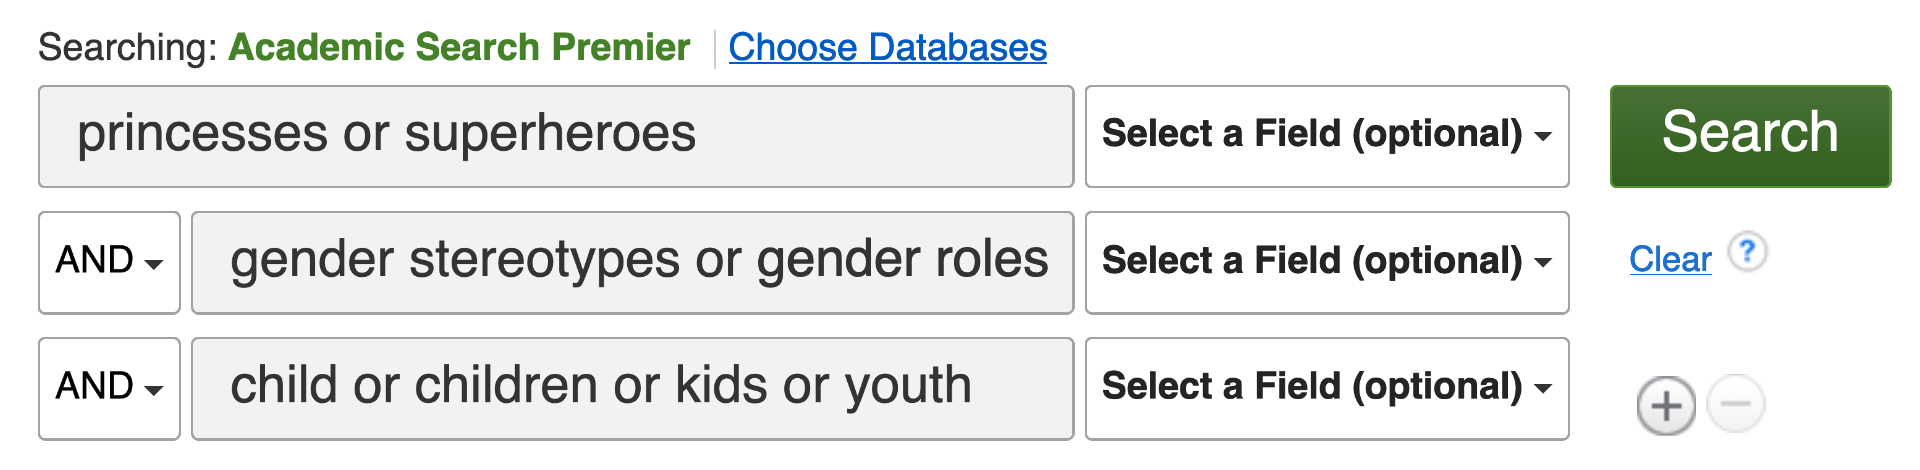 example search in Academic Search Premier. In the first search box we have princesses or superheroes. In the next we have gender stereotypes or gender roles. In the third we have child or children or kids or youth.